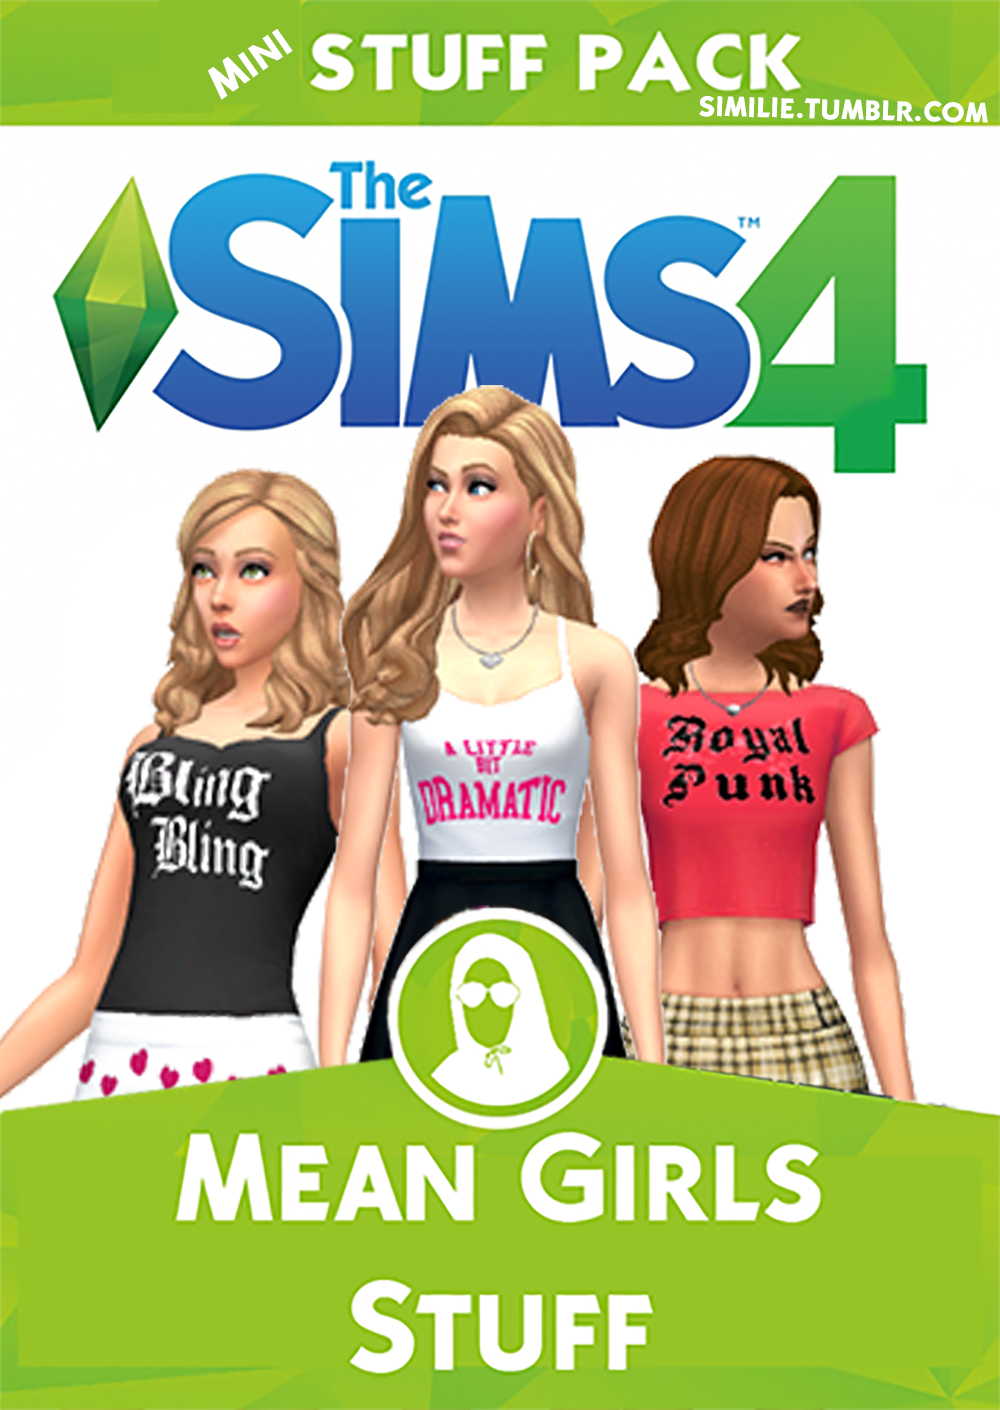 Sims 4 Stuff Pack Free Download Marcopax